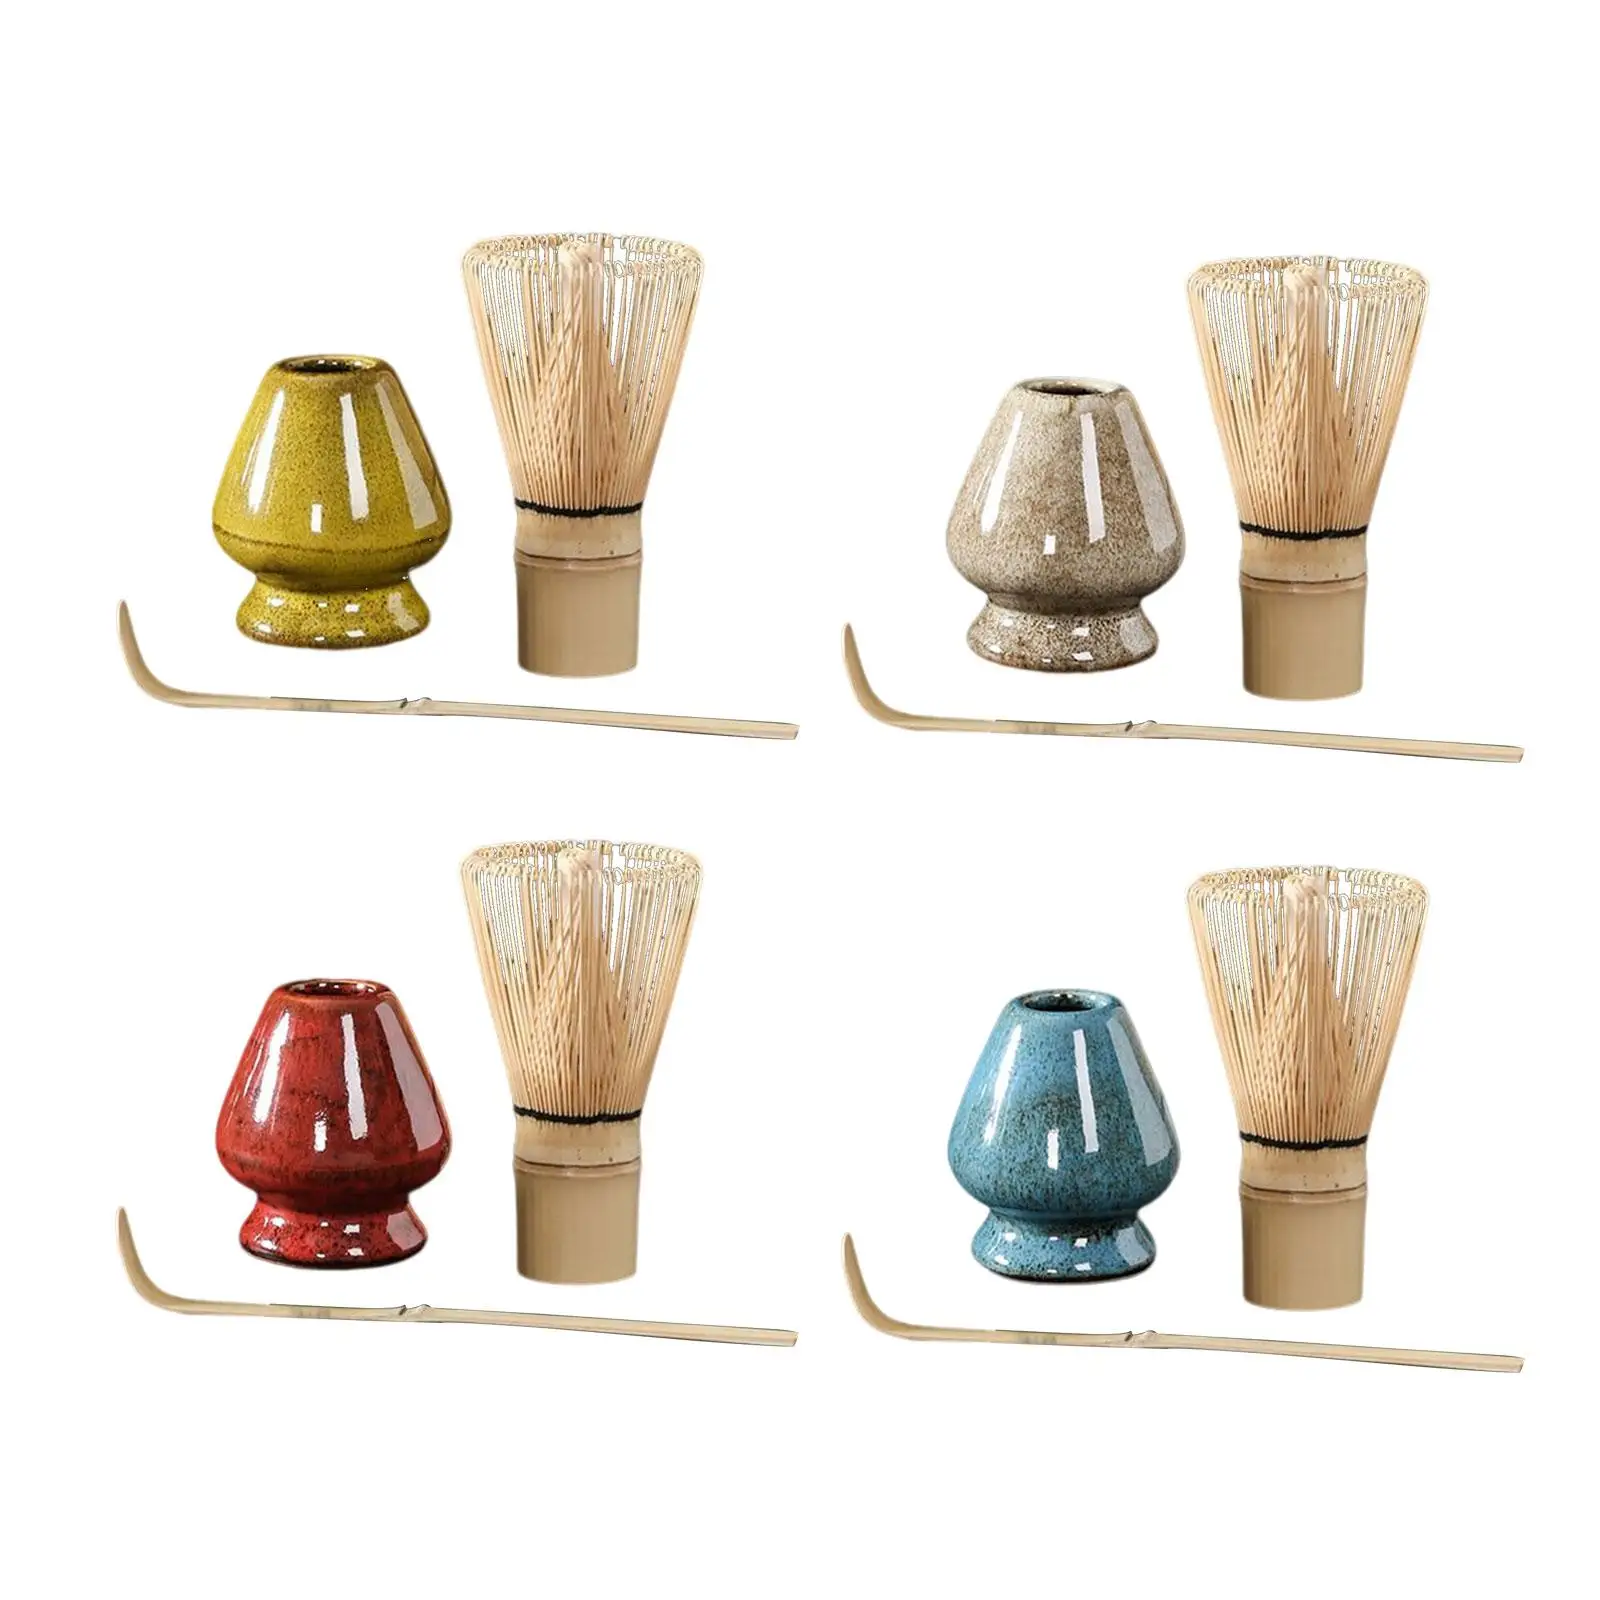 

3x Japanese Tea Making Tools Matcha Whisk Set Ceramic Traditional Matcha Whisk Holder for Tea Room Household Reception Party